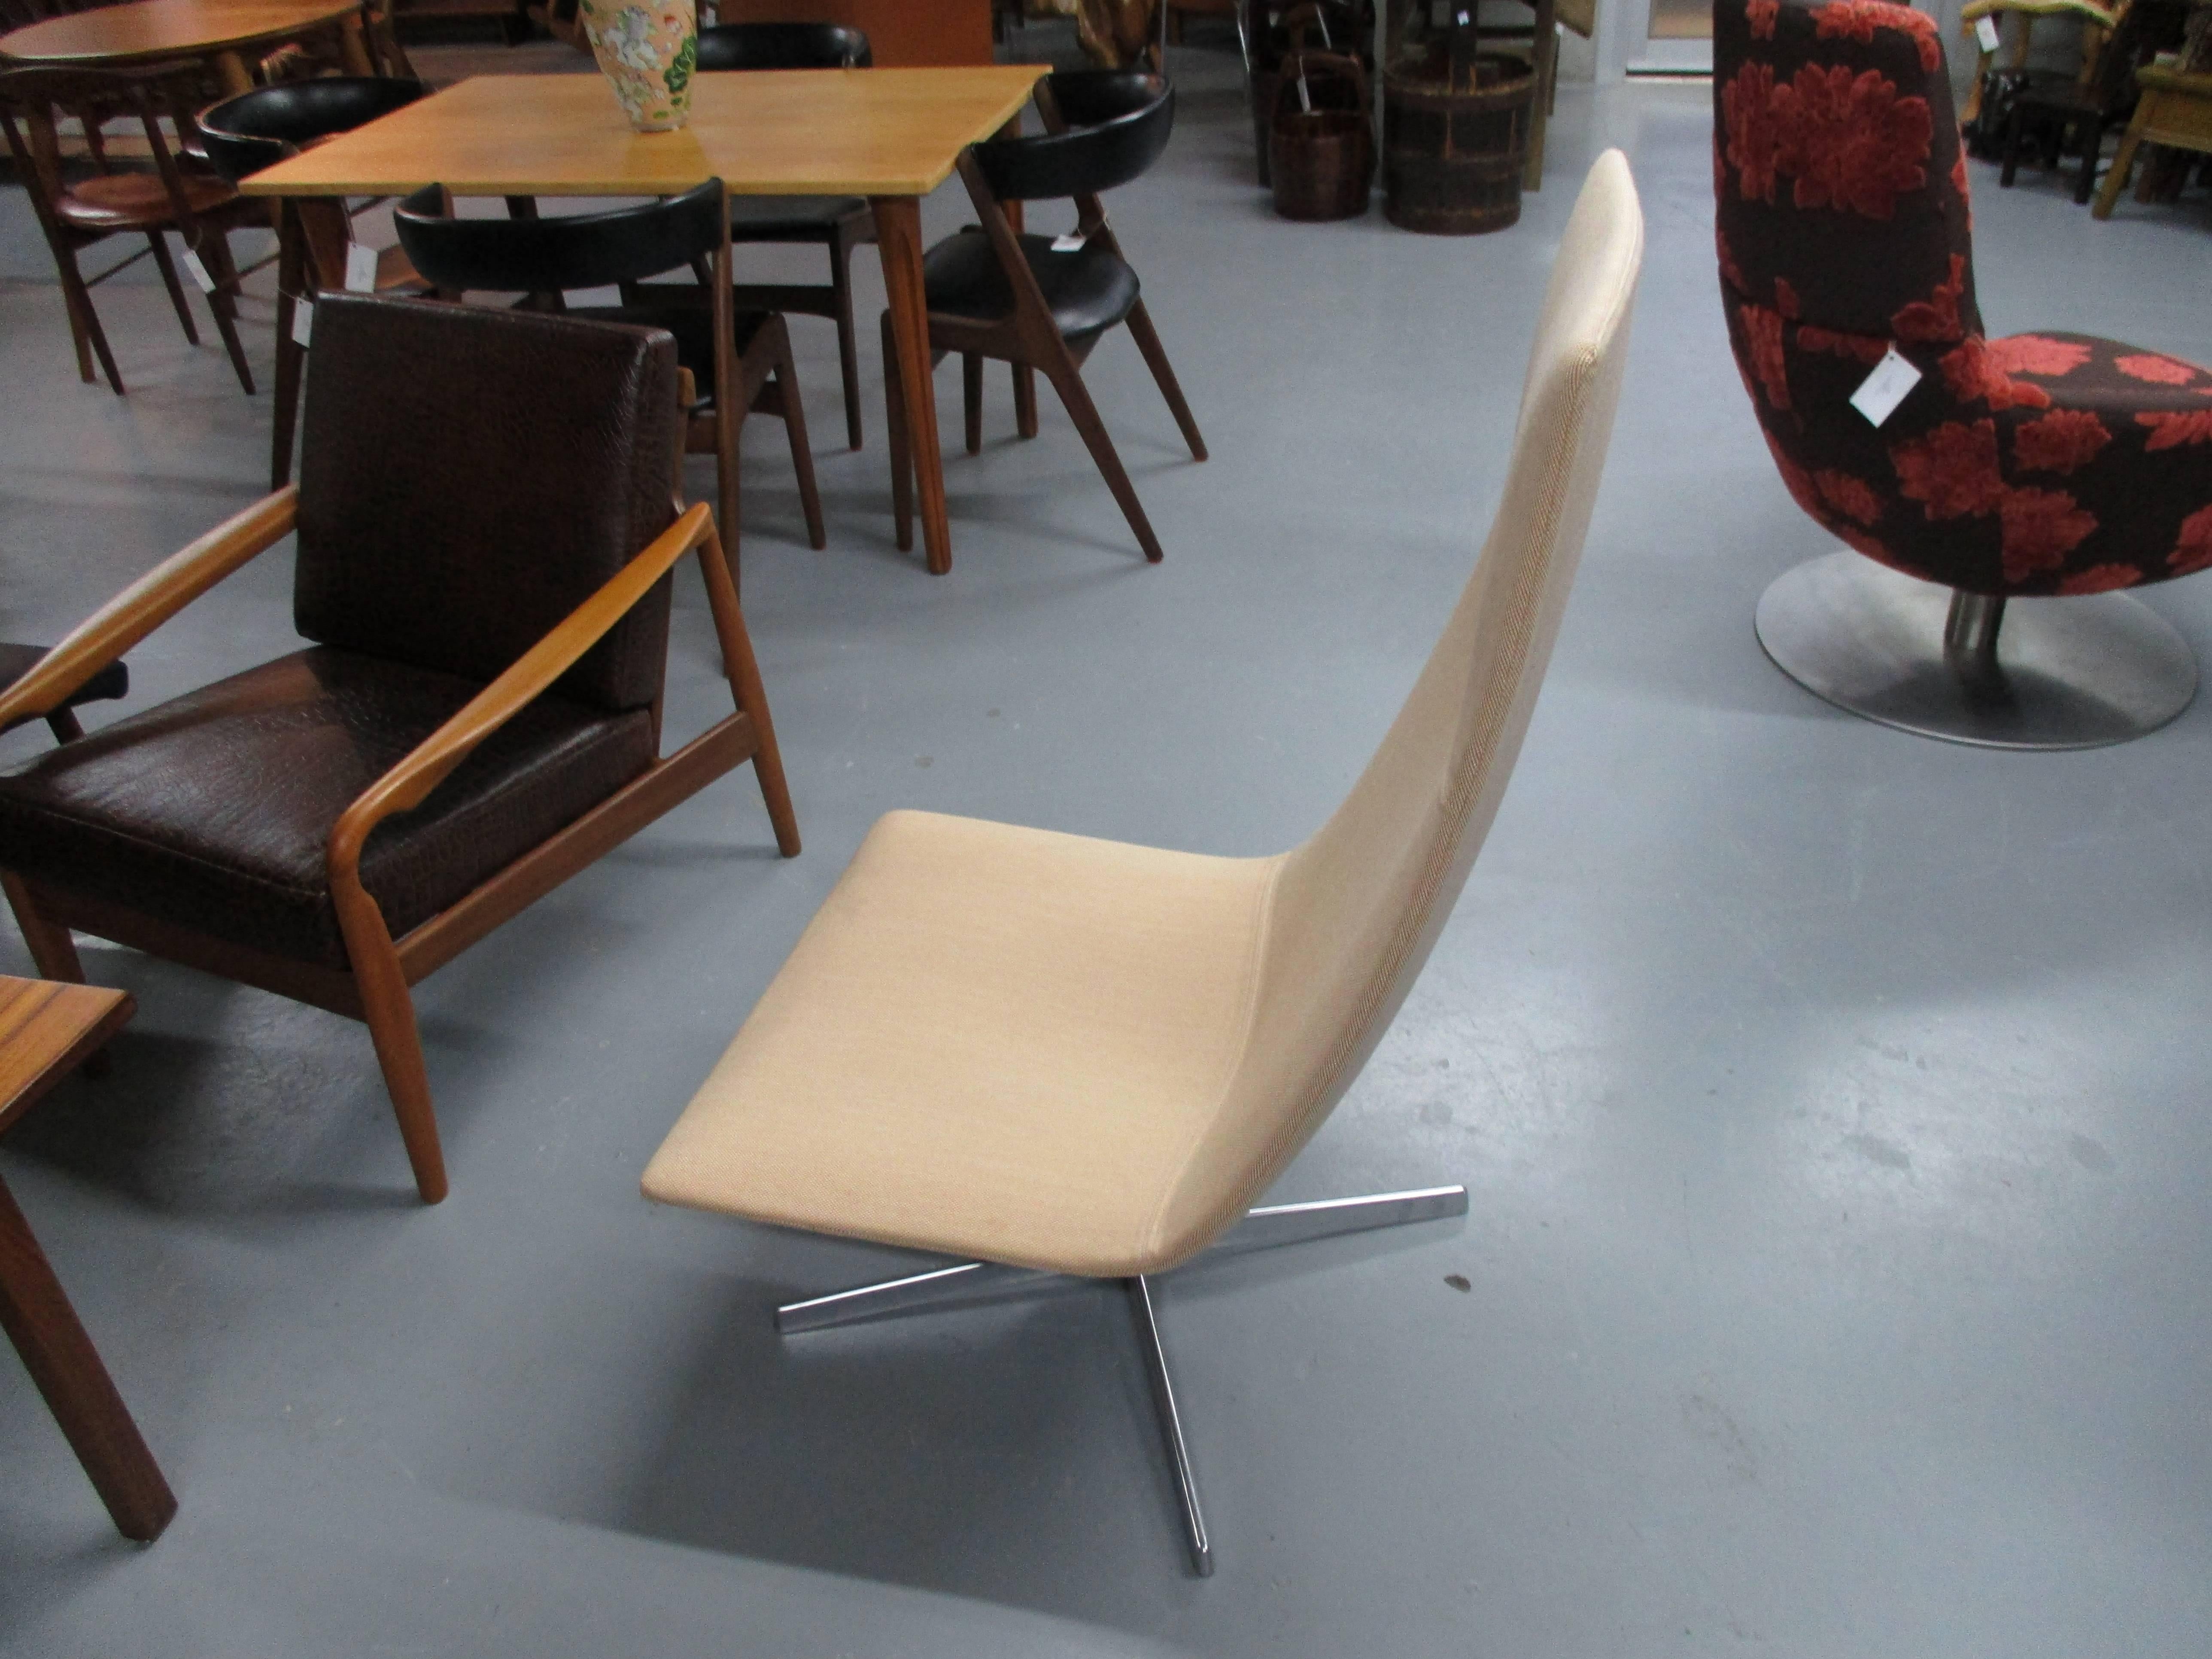 Smooth style swivel chair by Lievore, Altherr and Molina.